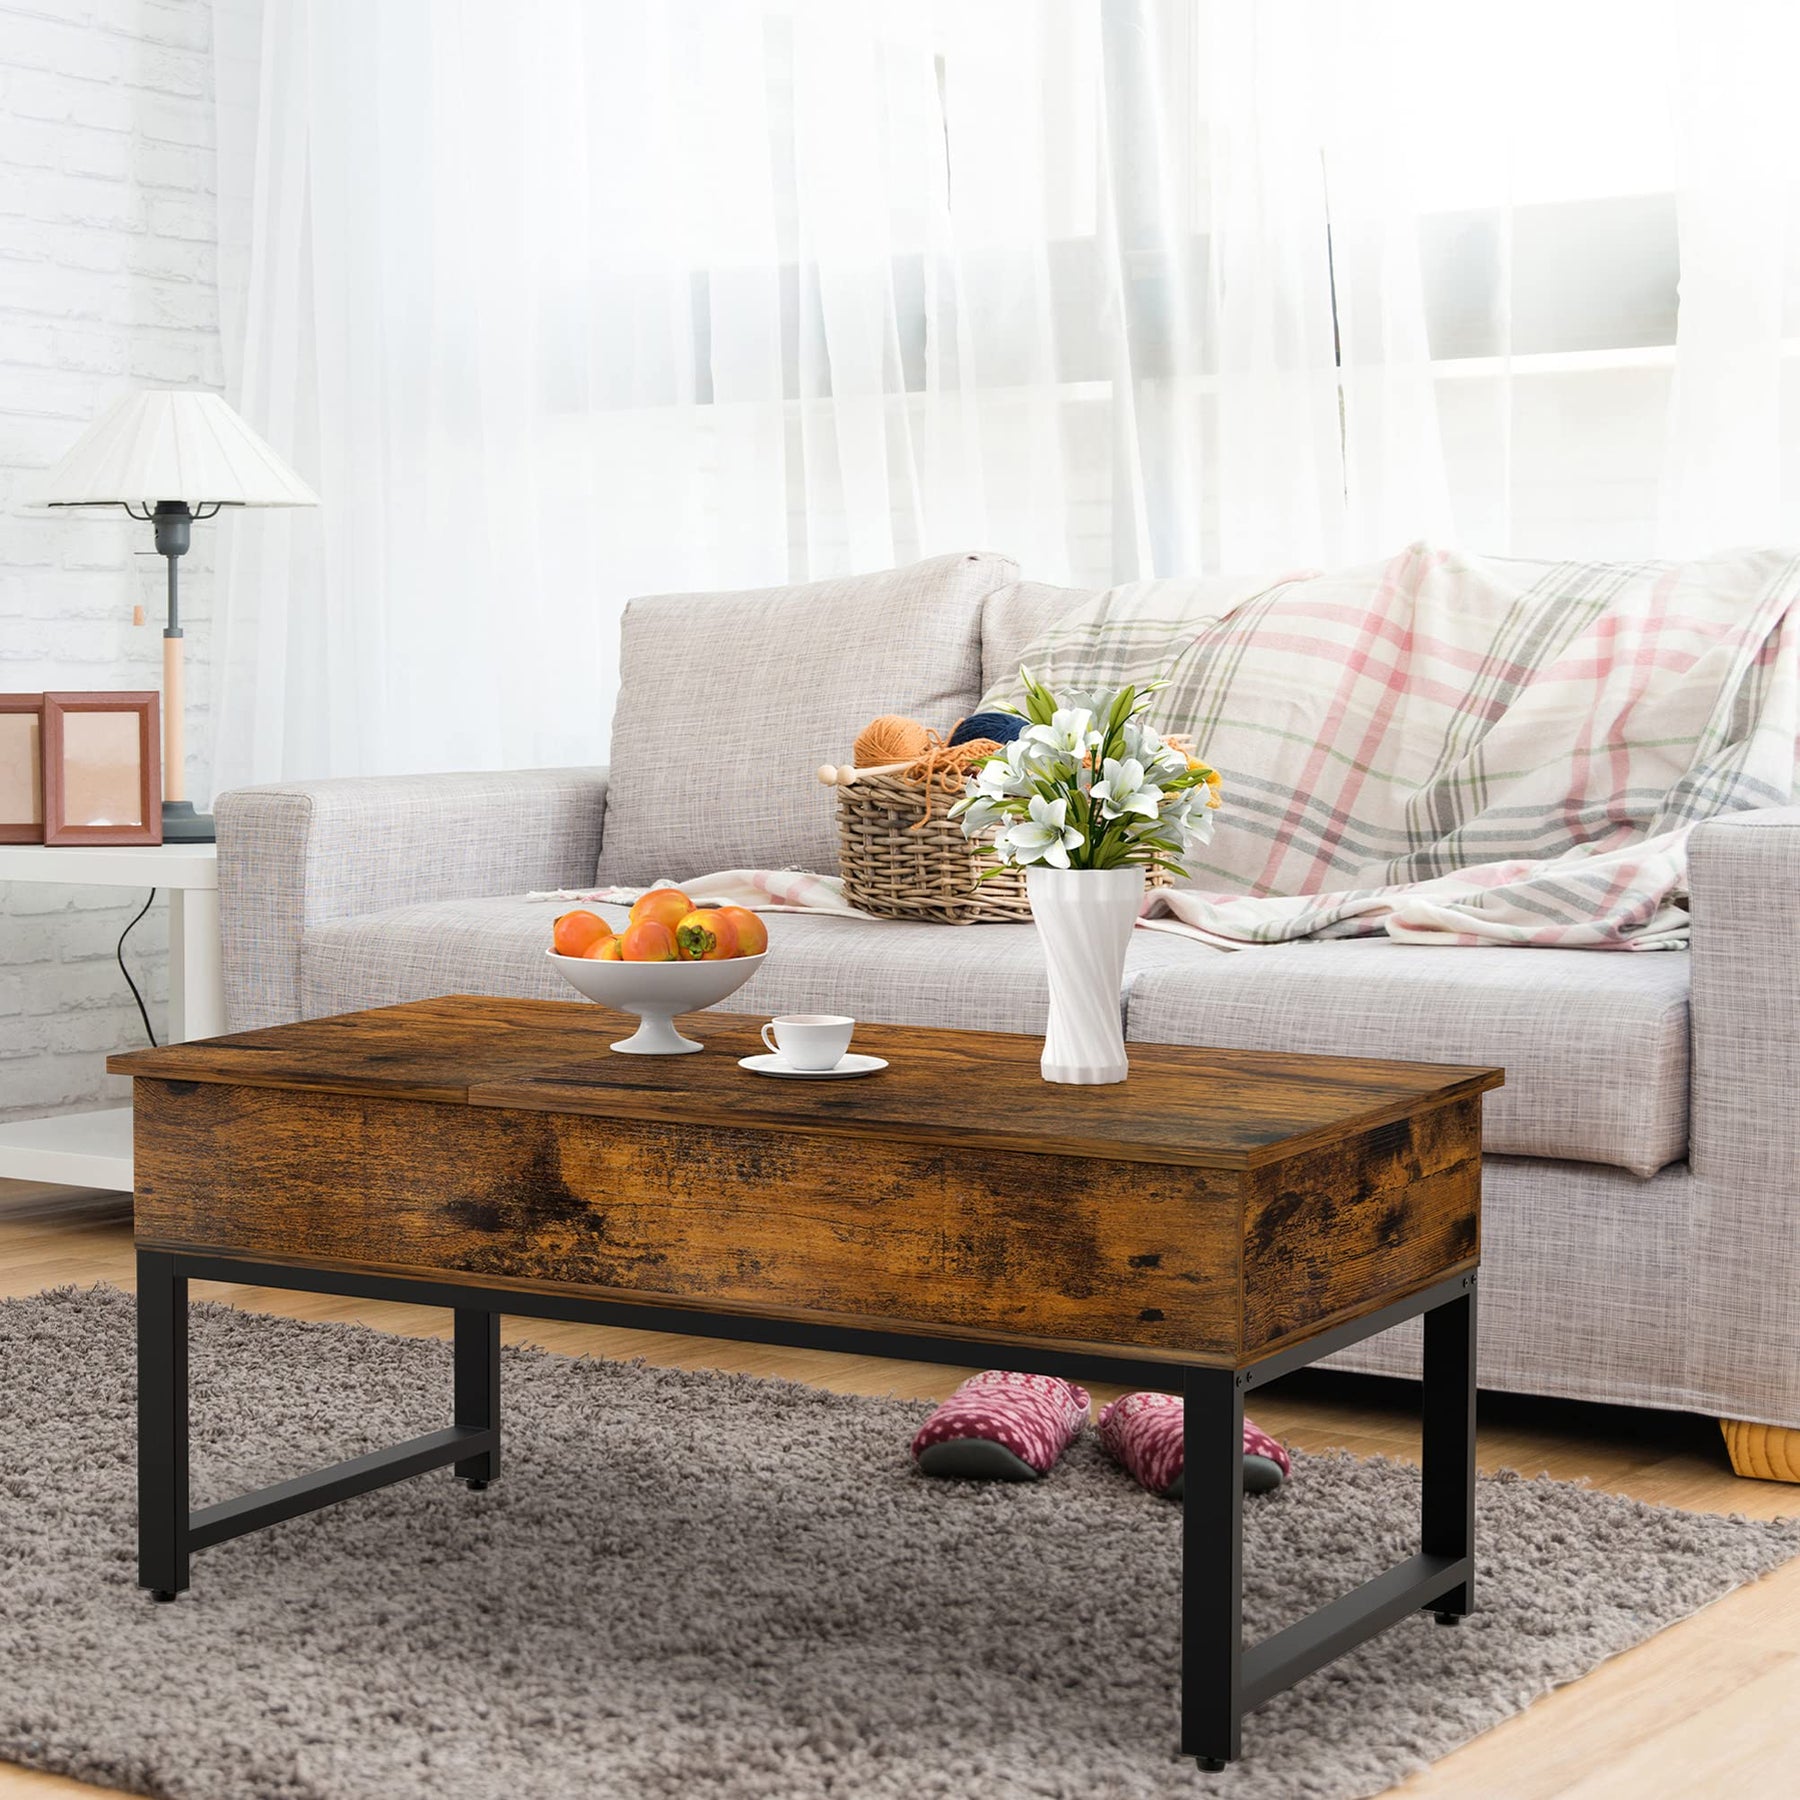 IDEALHOUSE Lift Top Coffee Table with Hidden Storage - Vintage